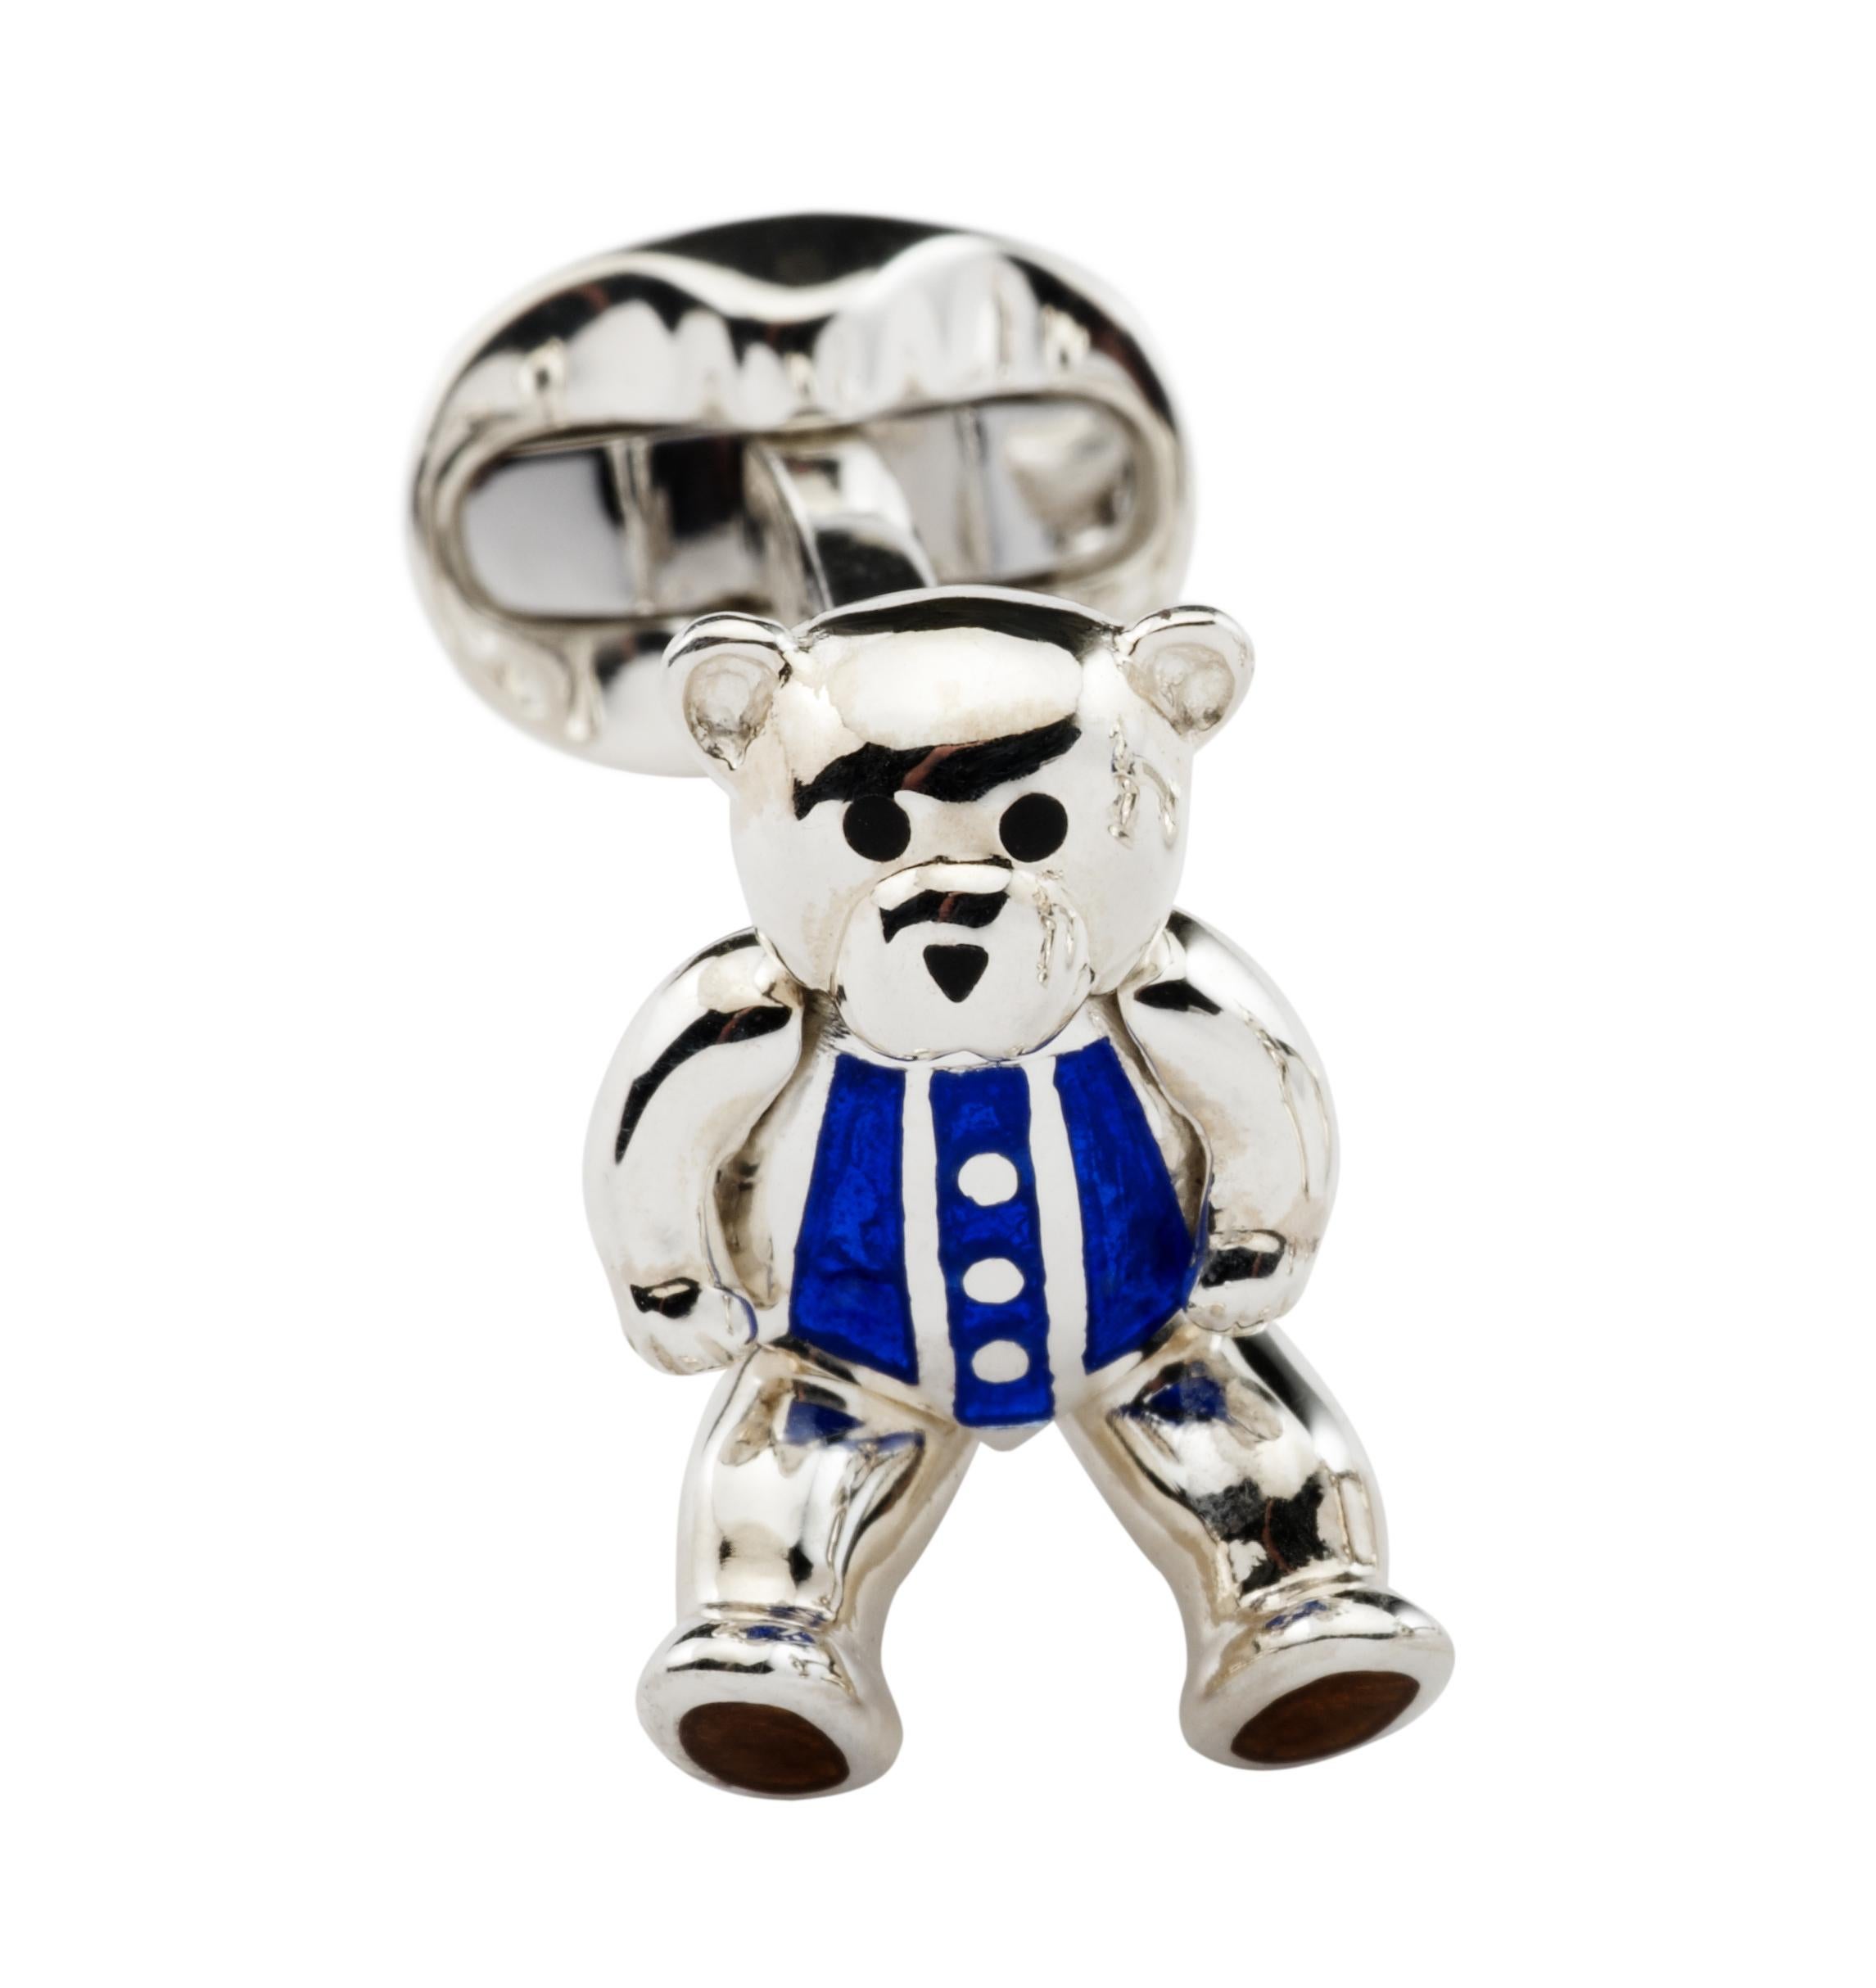 DEAKIN & FRANCIS, Piccadilly Arcade, London

Show off your adorable side with these gorgeous sterling silver teddy bear cufflinks! With moveable arms and legs, these cufflinks are the cutest accessory. Hand-enamelled in an attractive blue finish,